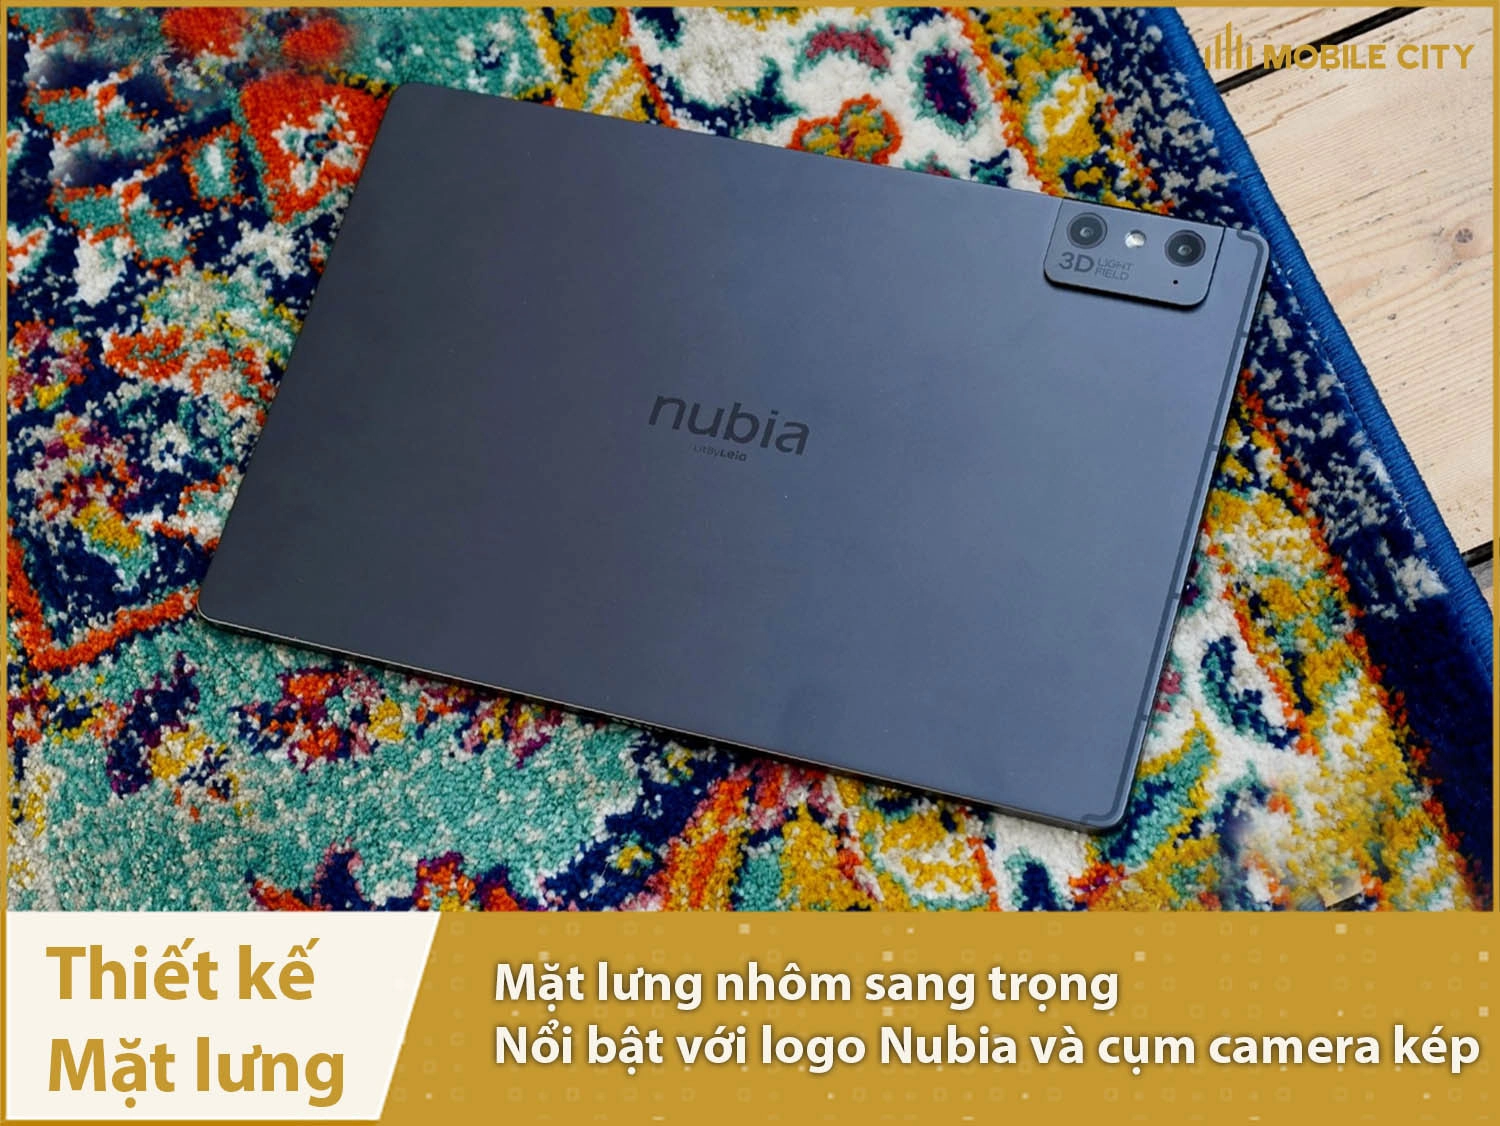  zte-nubia-pad-3d-danh-gia-mat-lung